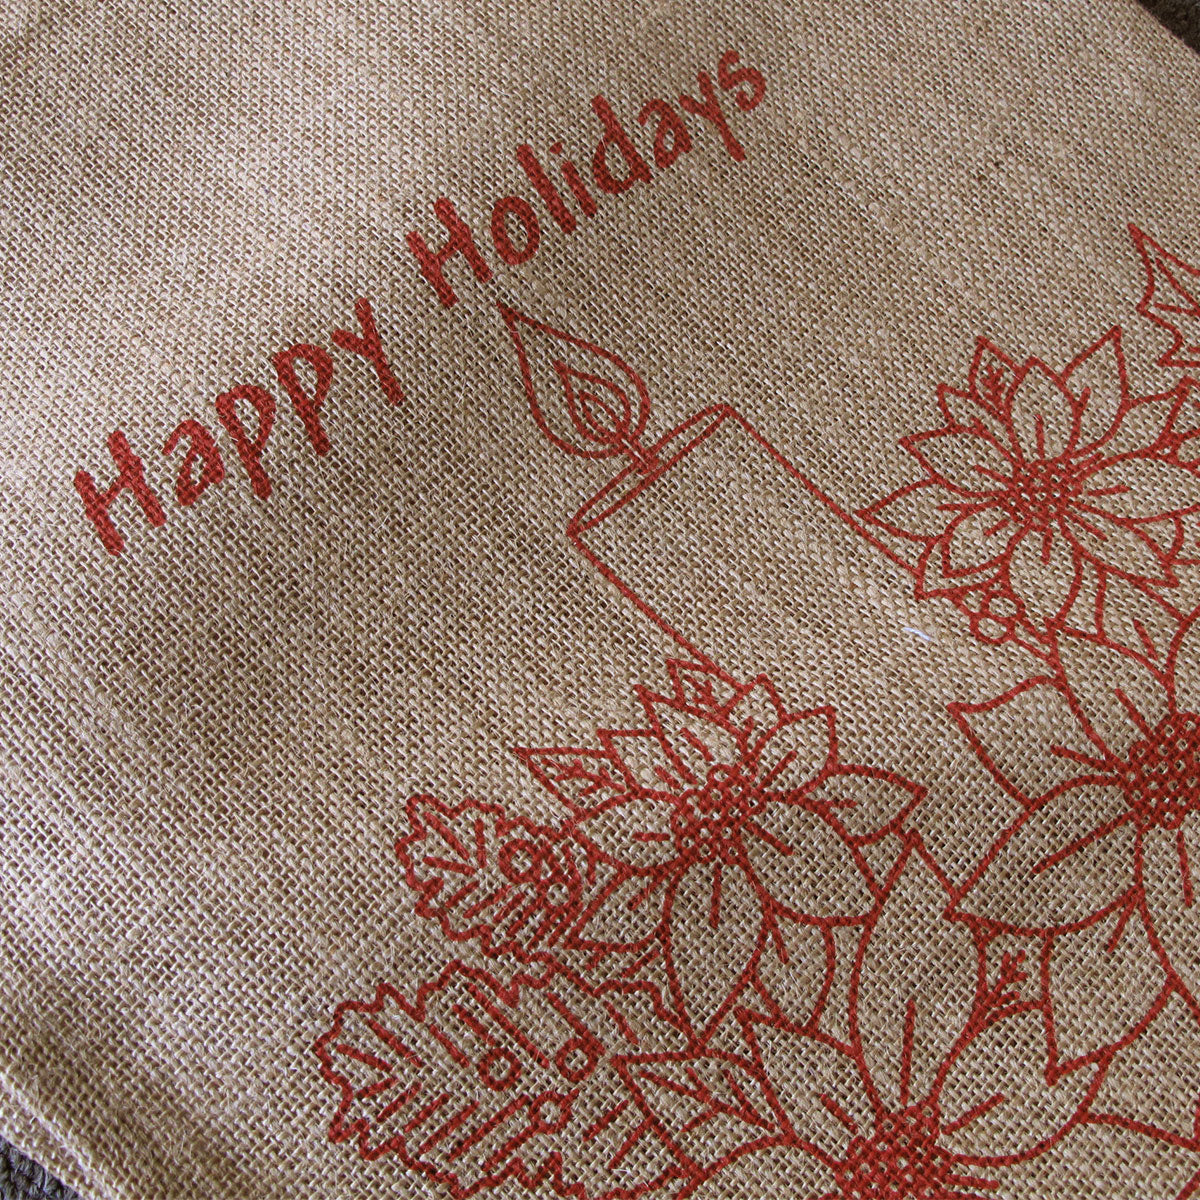 Christmas Jute Woven Taupe Table Runner 33 x 180cm Happy Holidays